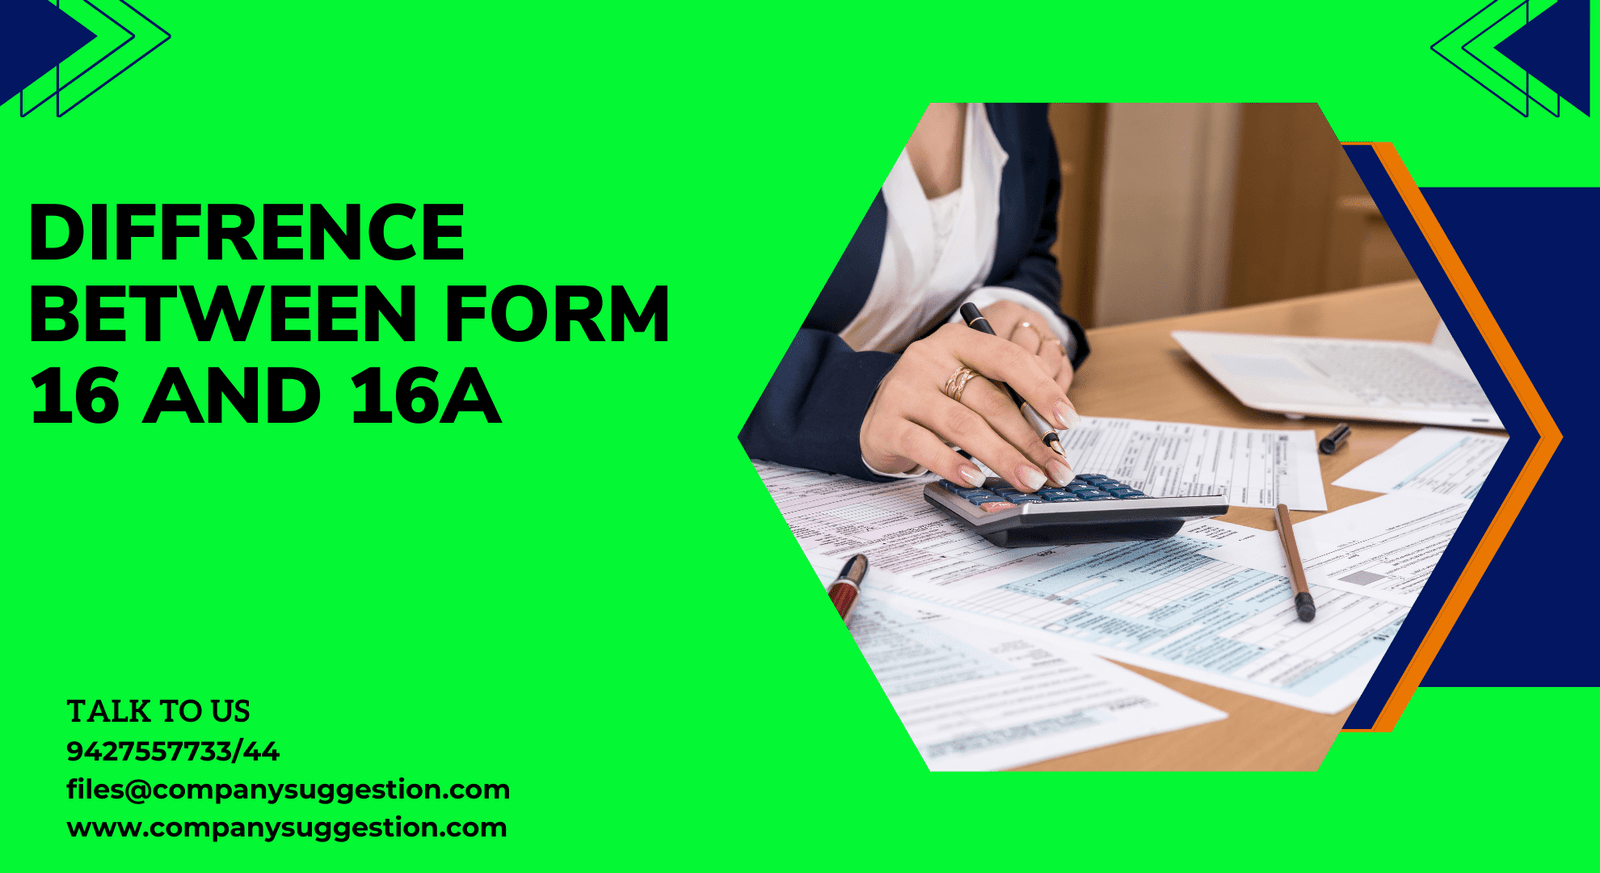 DIFFRENCE BETWEEN FORM 16 AND 16A